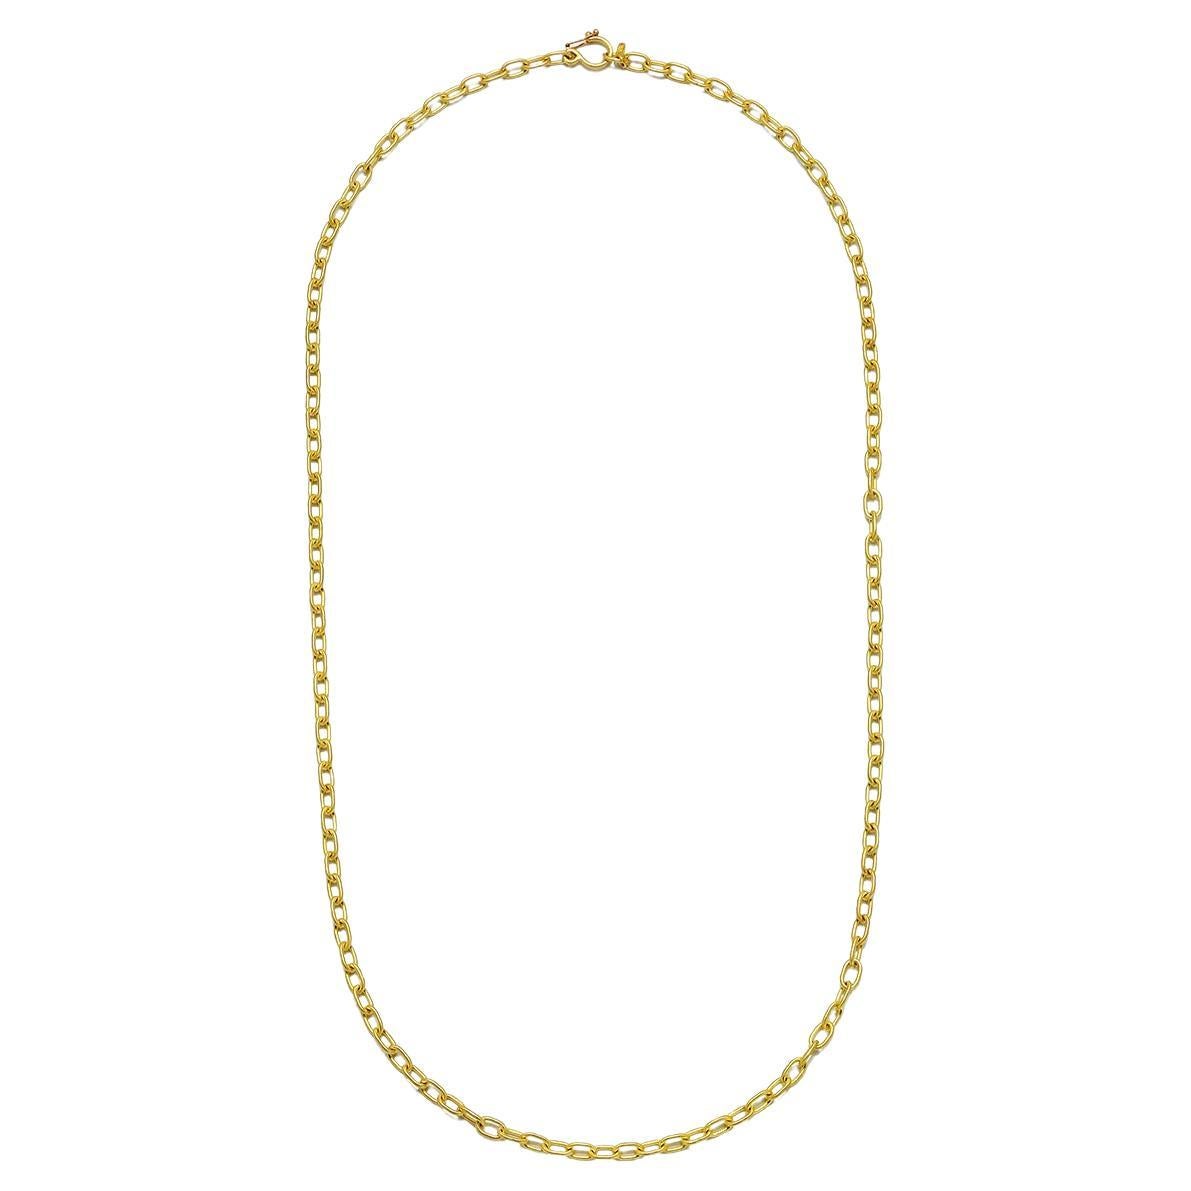 Faye Kim 18 Karat Gold Heavy Oval Link Chain, Small Length 24" For Sale